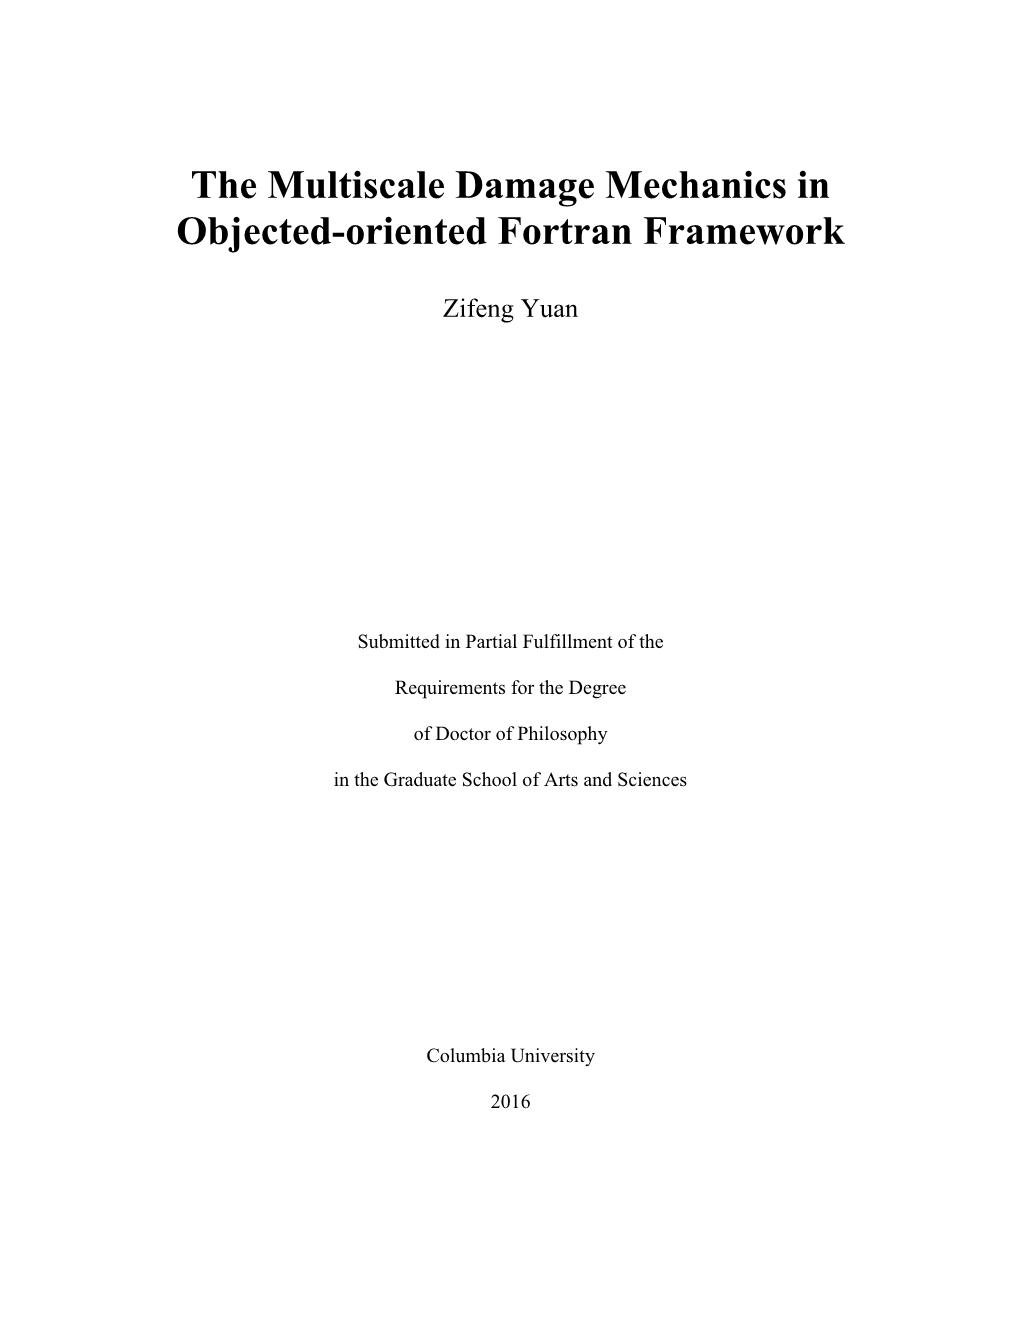 The Multiscale Damage Mechanics in Objected-Oriented Fortran Framework